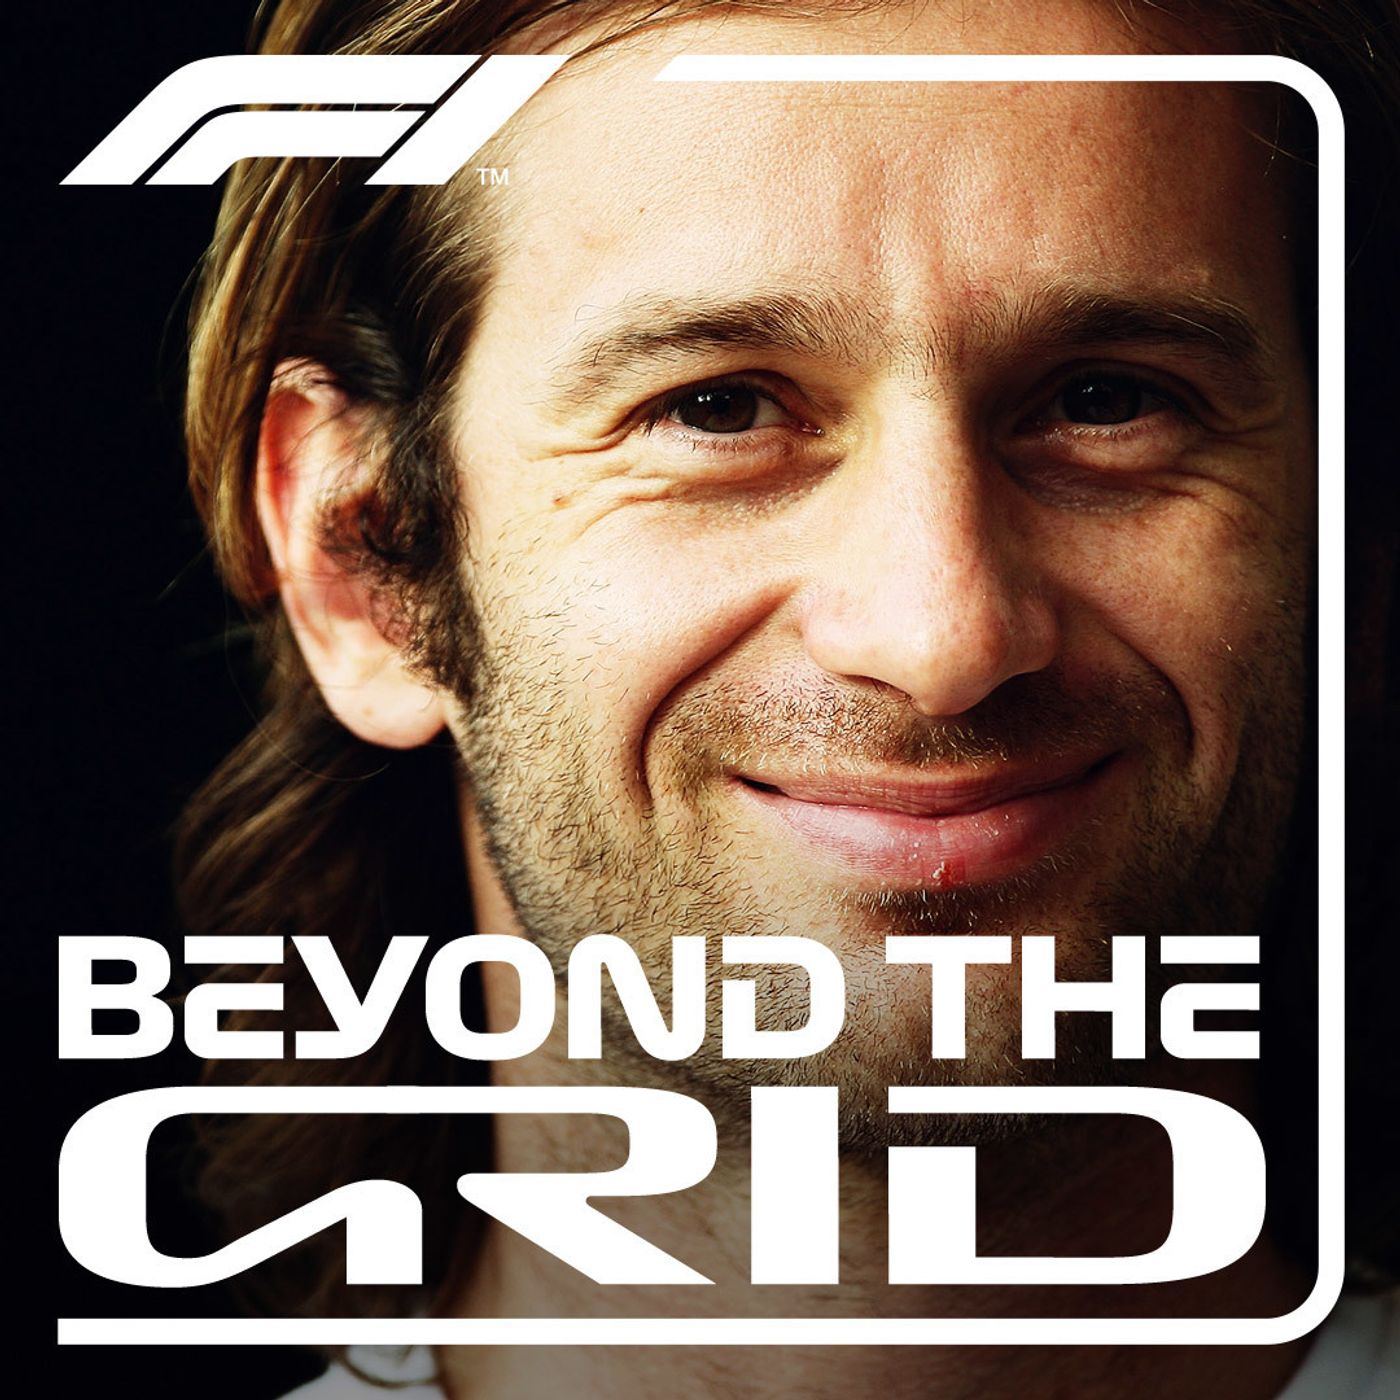 Jarno Trulli on winning Monaco, acing qualifying and why Alonso is so quick